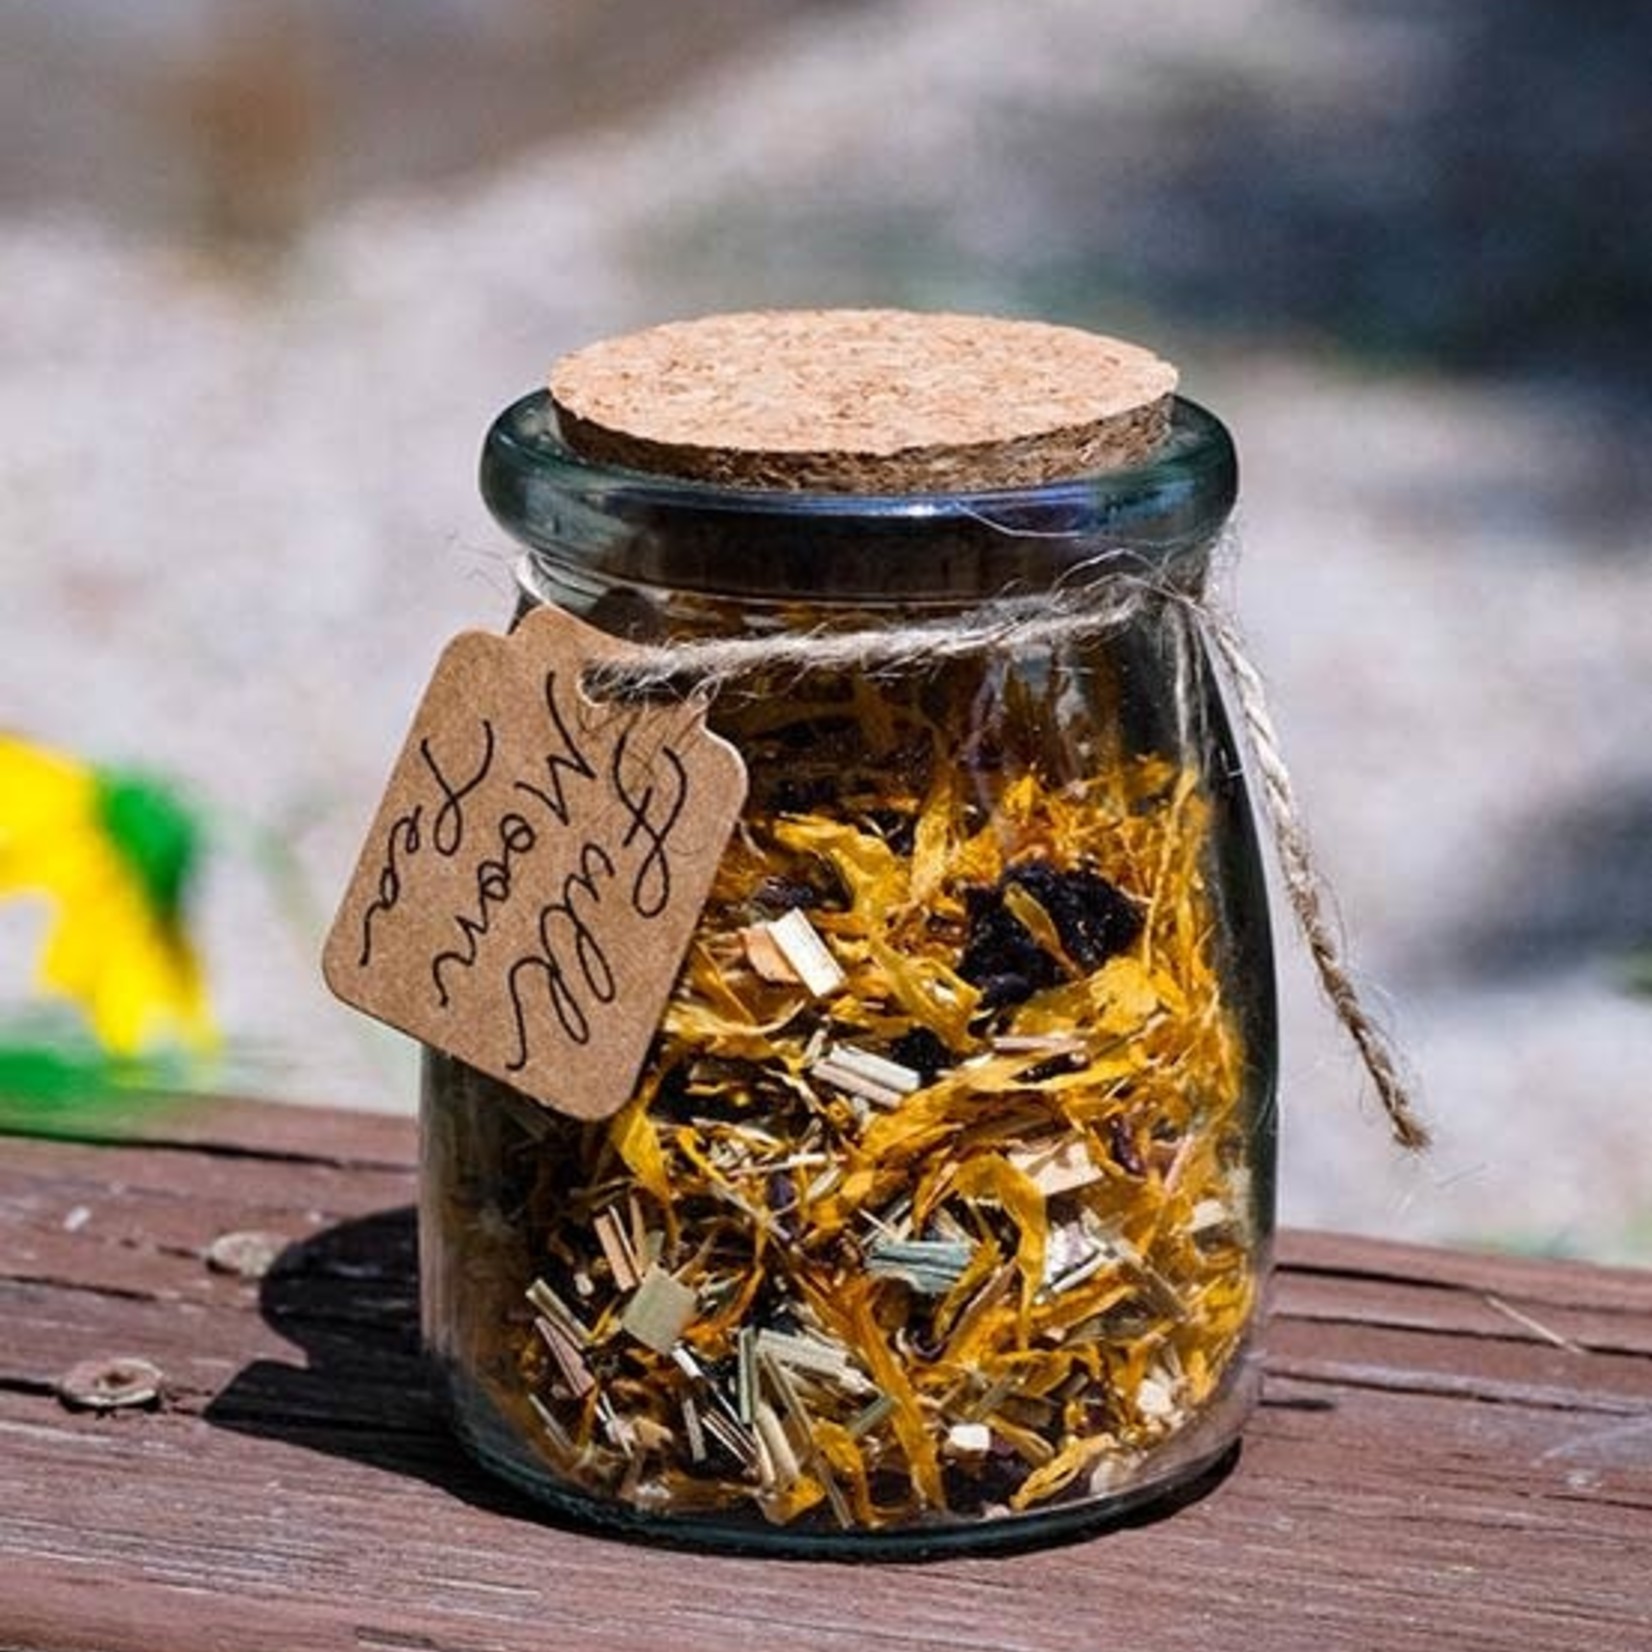 Earth Commons Full Moon Tea by Earth Commons